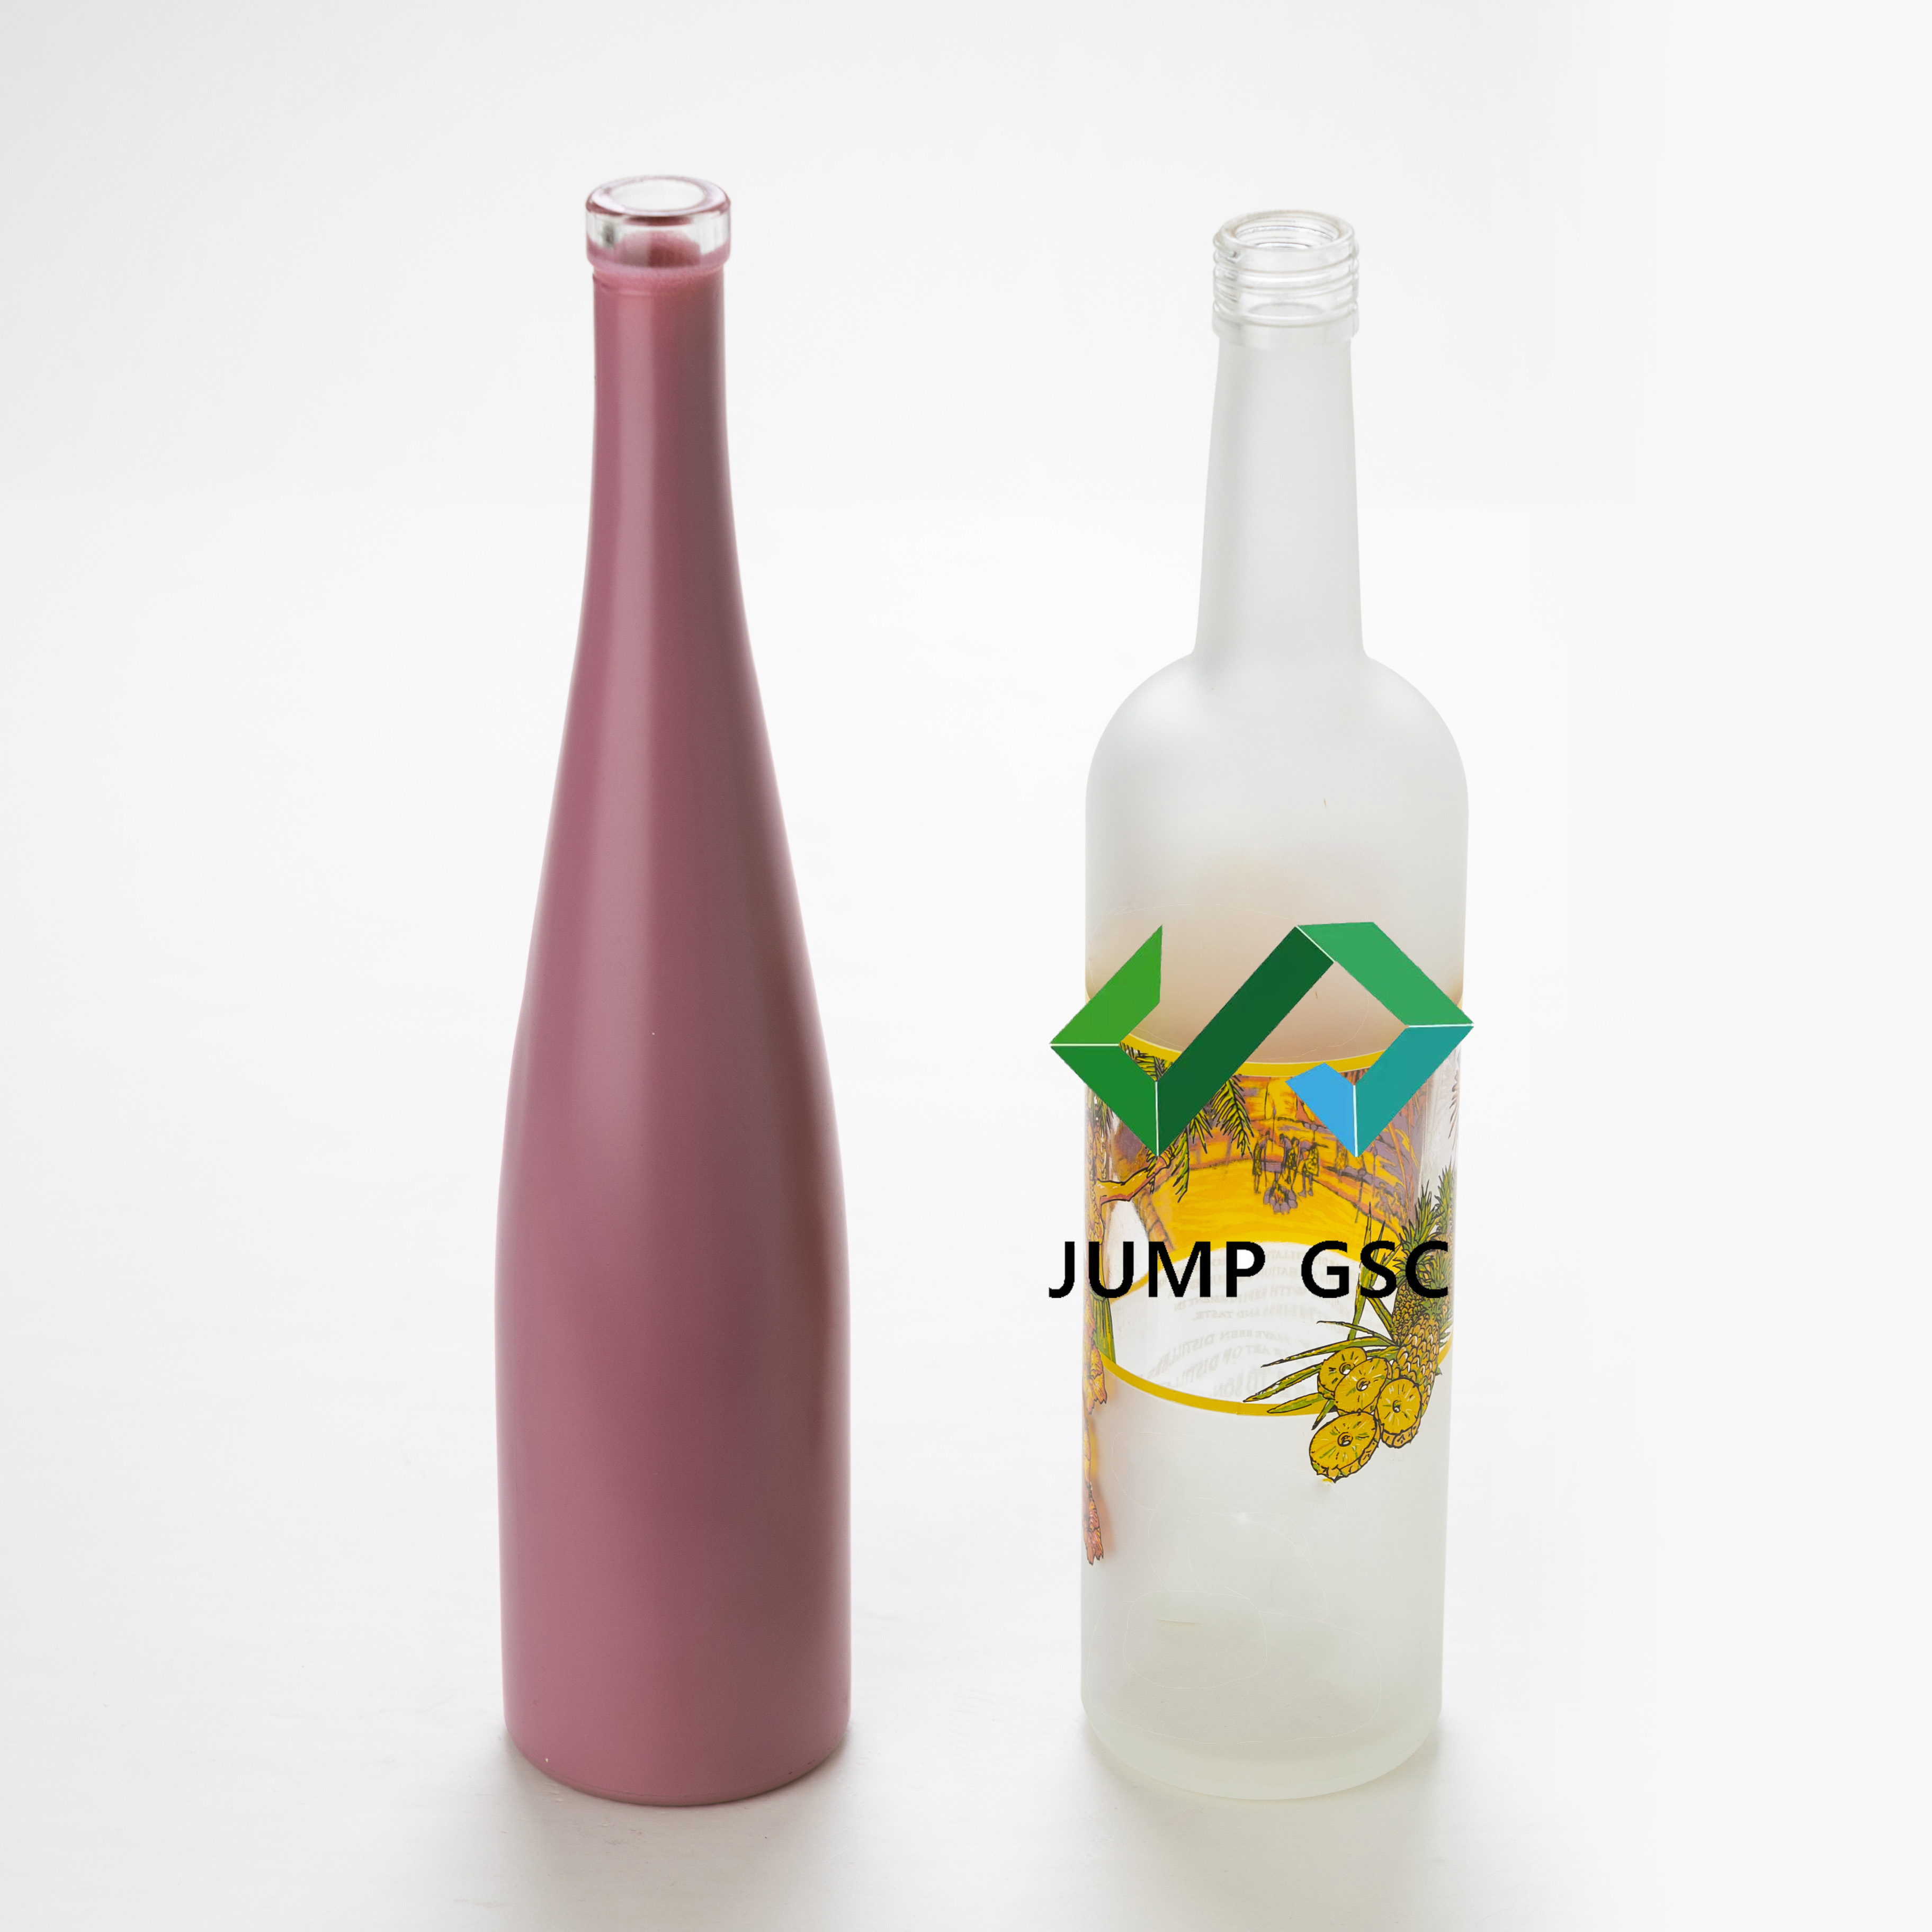 Frosted glss wine bottle